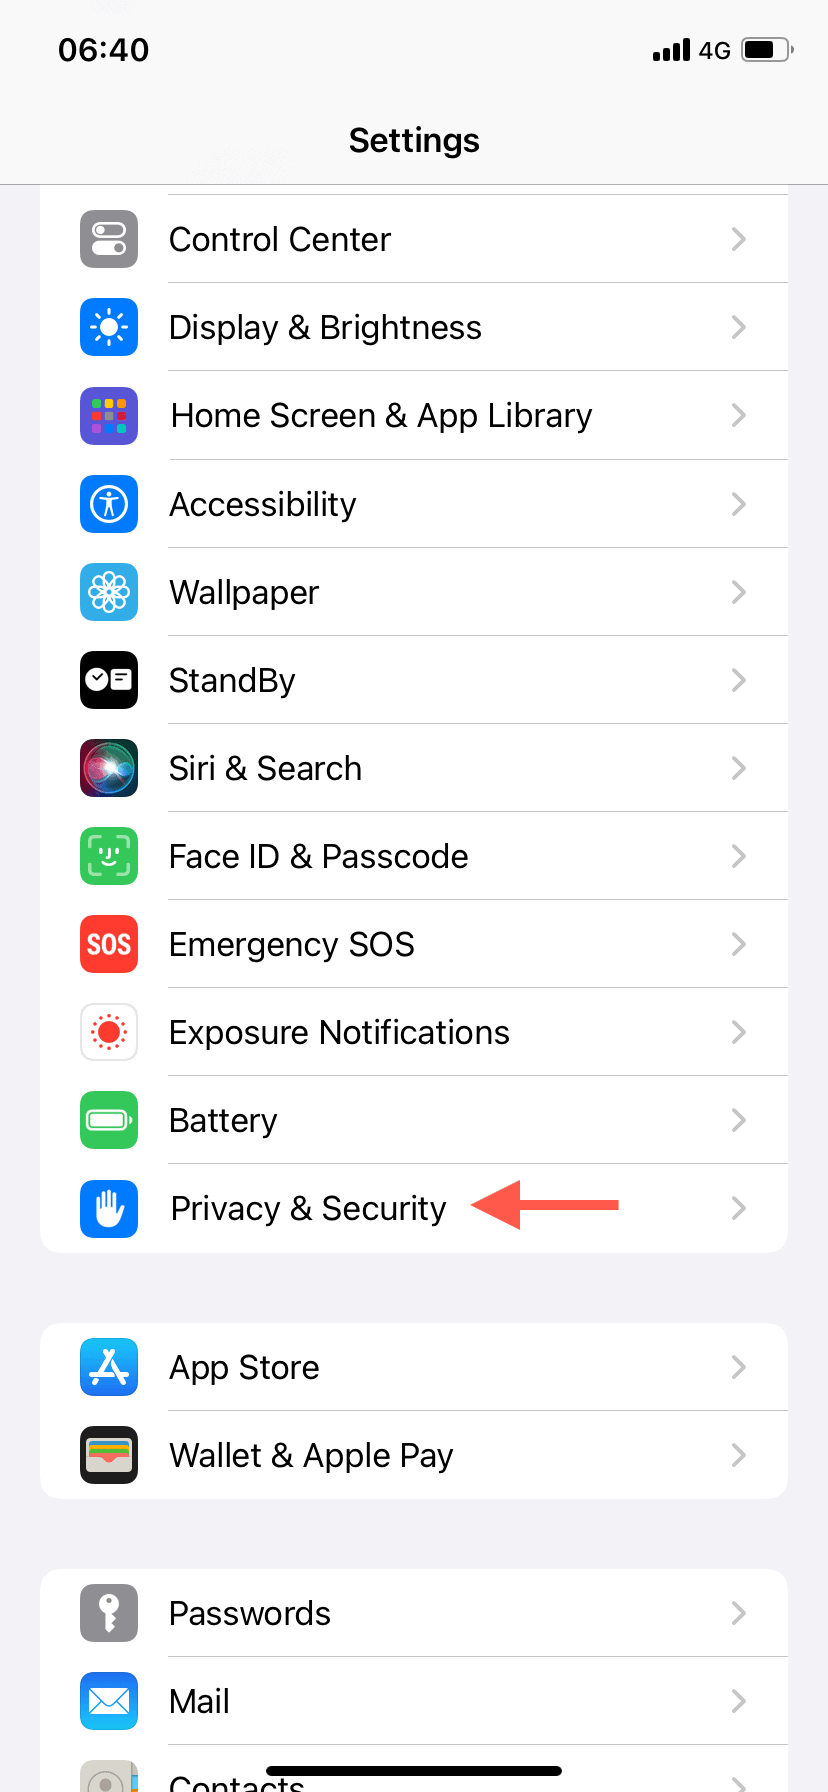 The iPhone's Settings app with the Privacy & Security option highlighted.